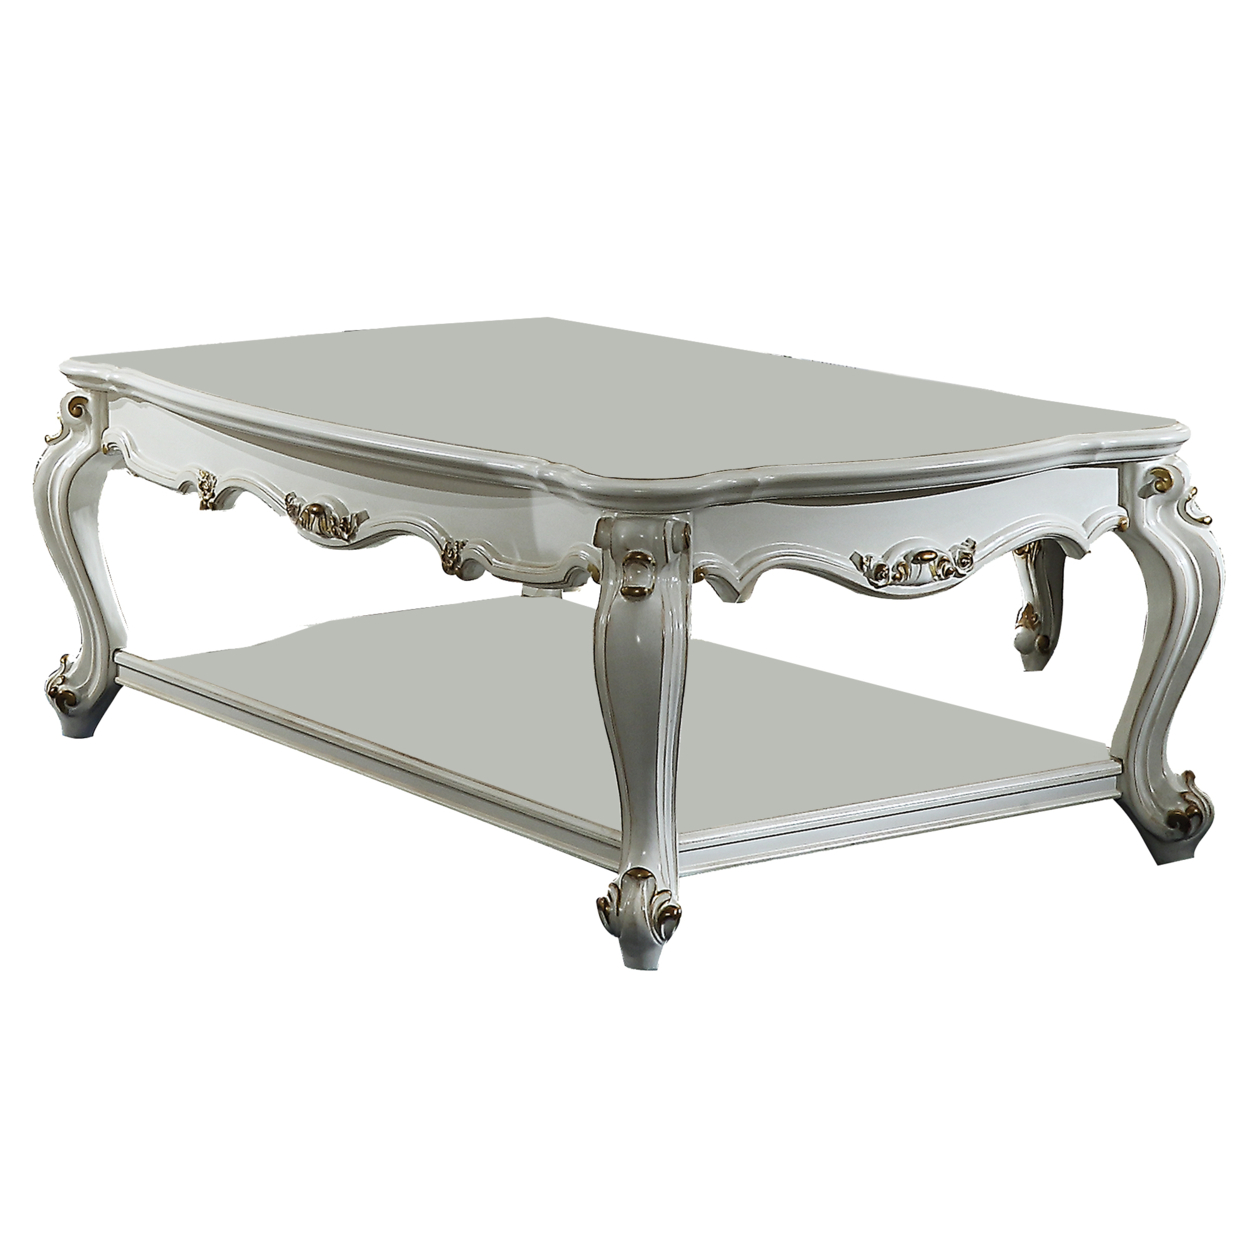 Traditional Style Wooden Coffee Table With Polyresin Carvings And Bottom Shelf, White- ACME